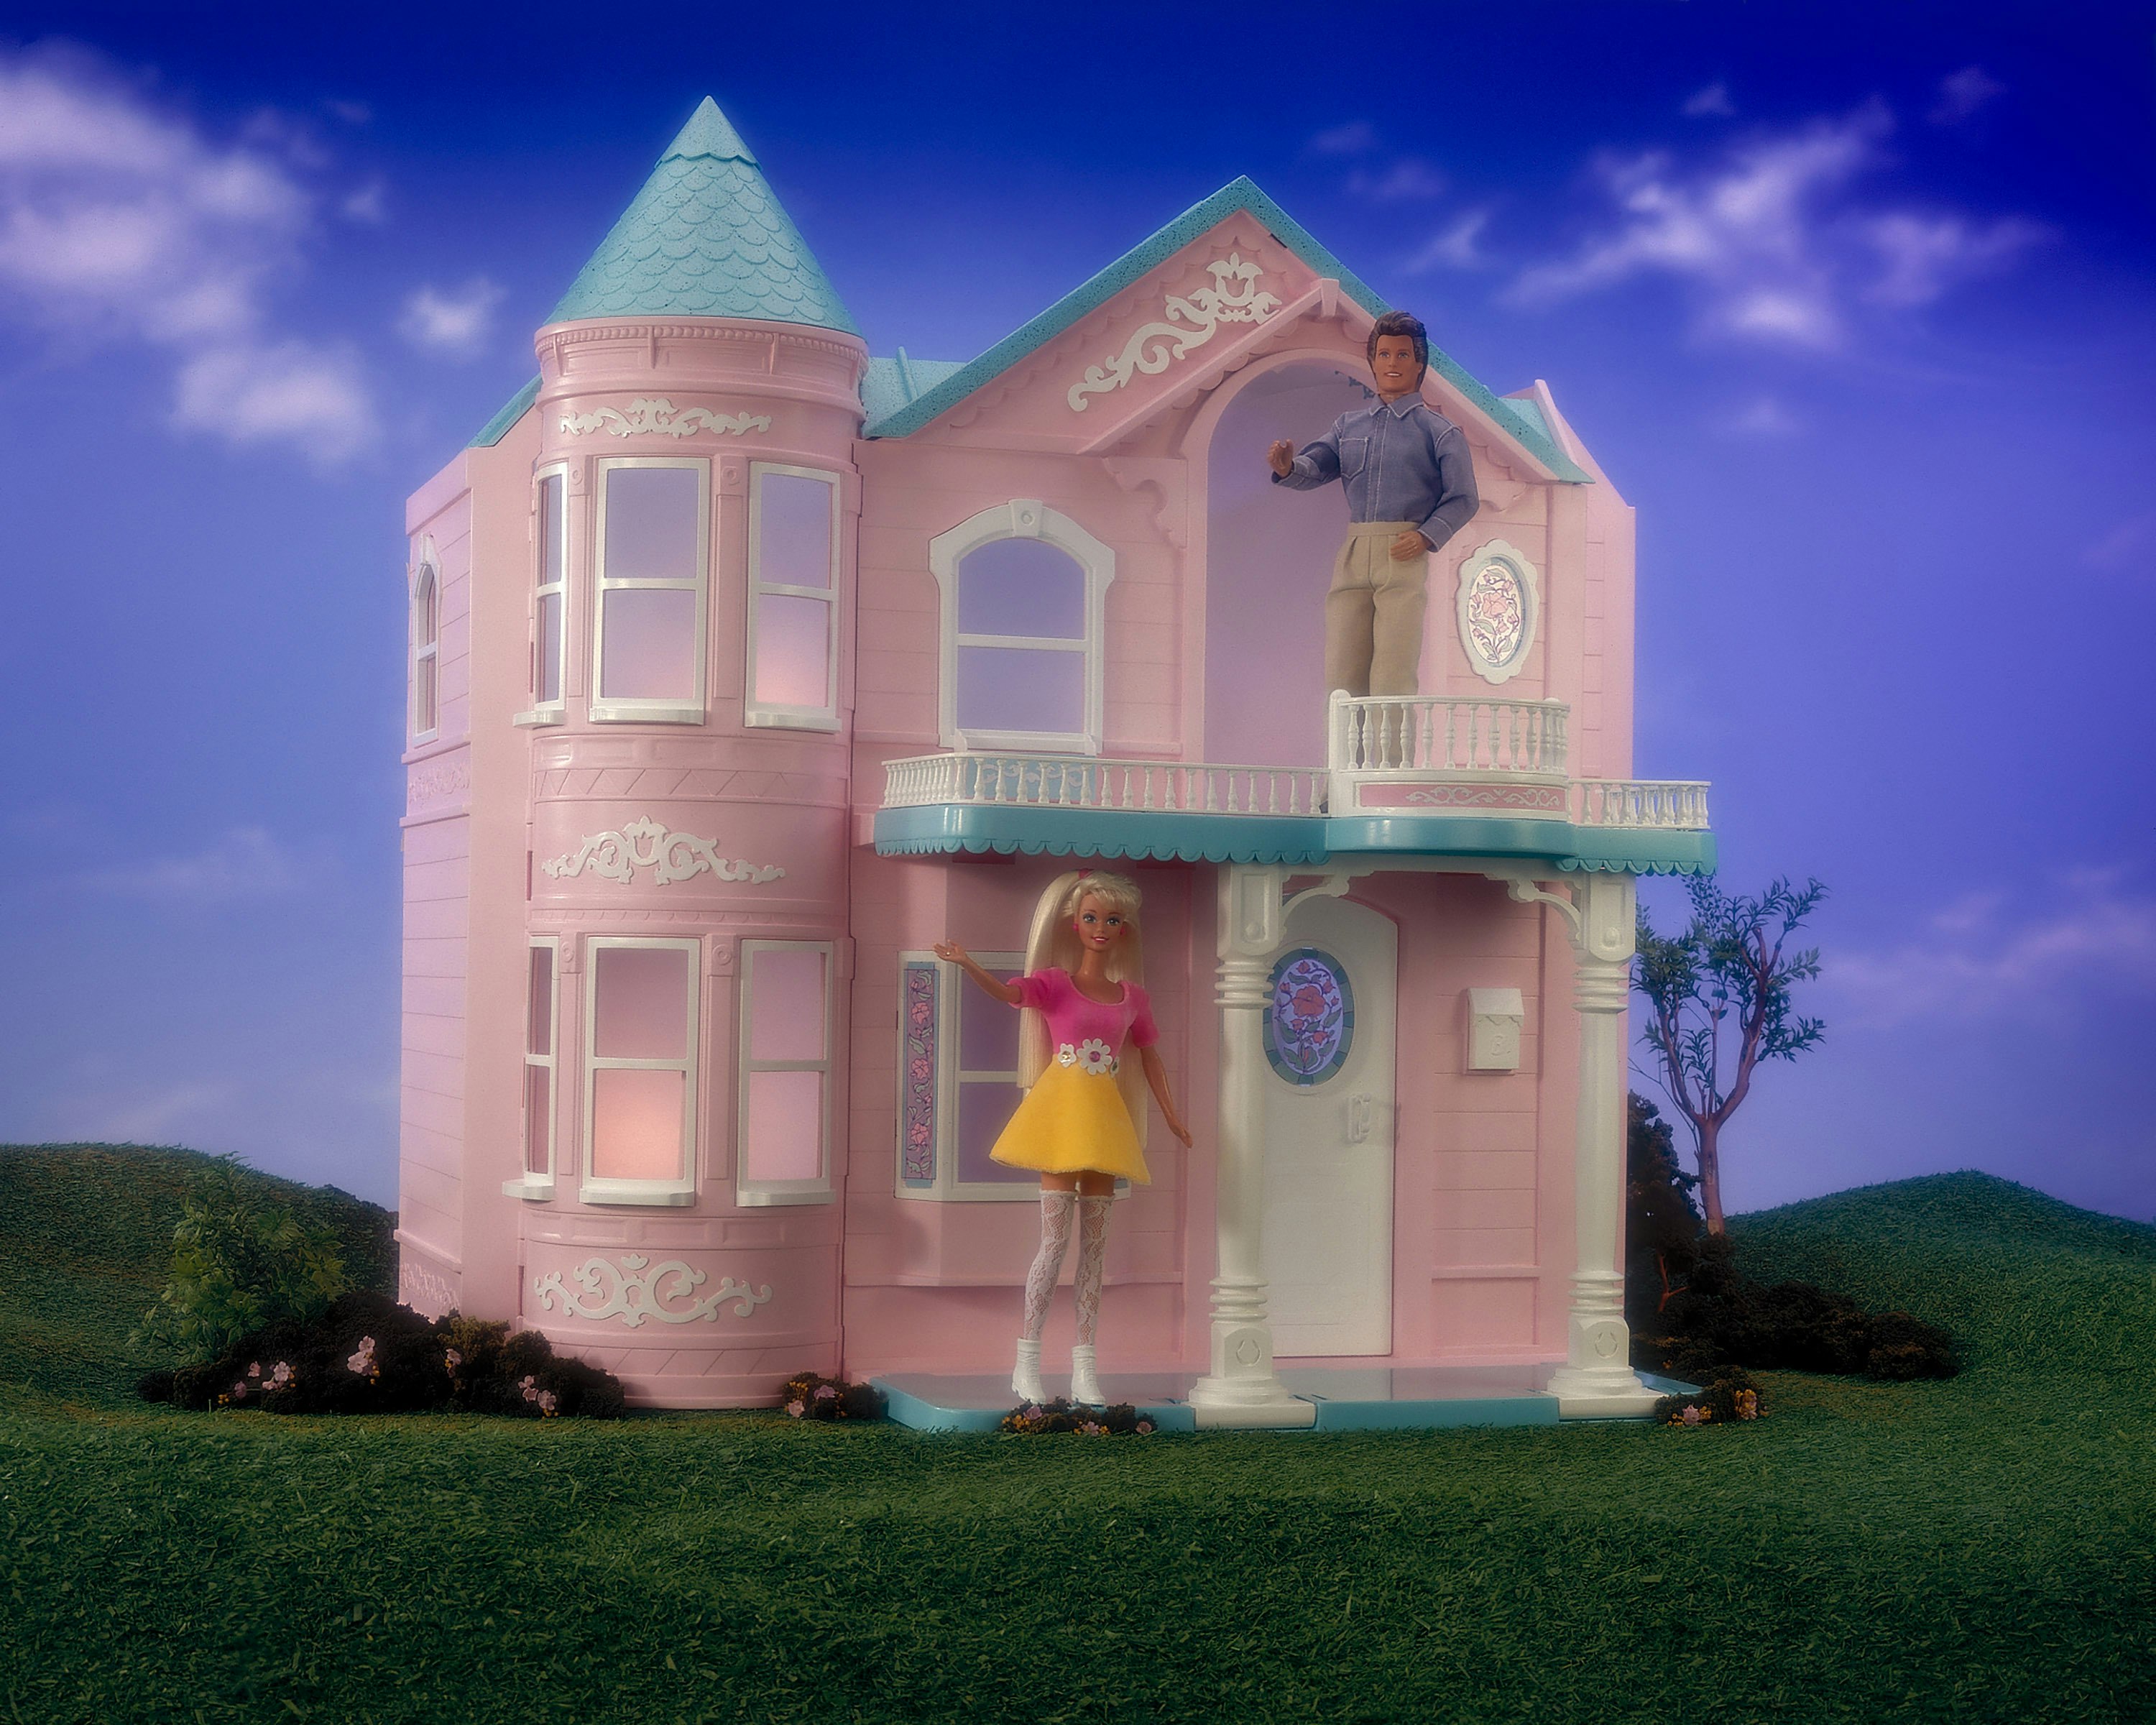 Barbie's First Dream House Was a Teeny Studio Apartment Made from Cardboard